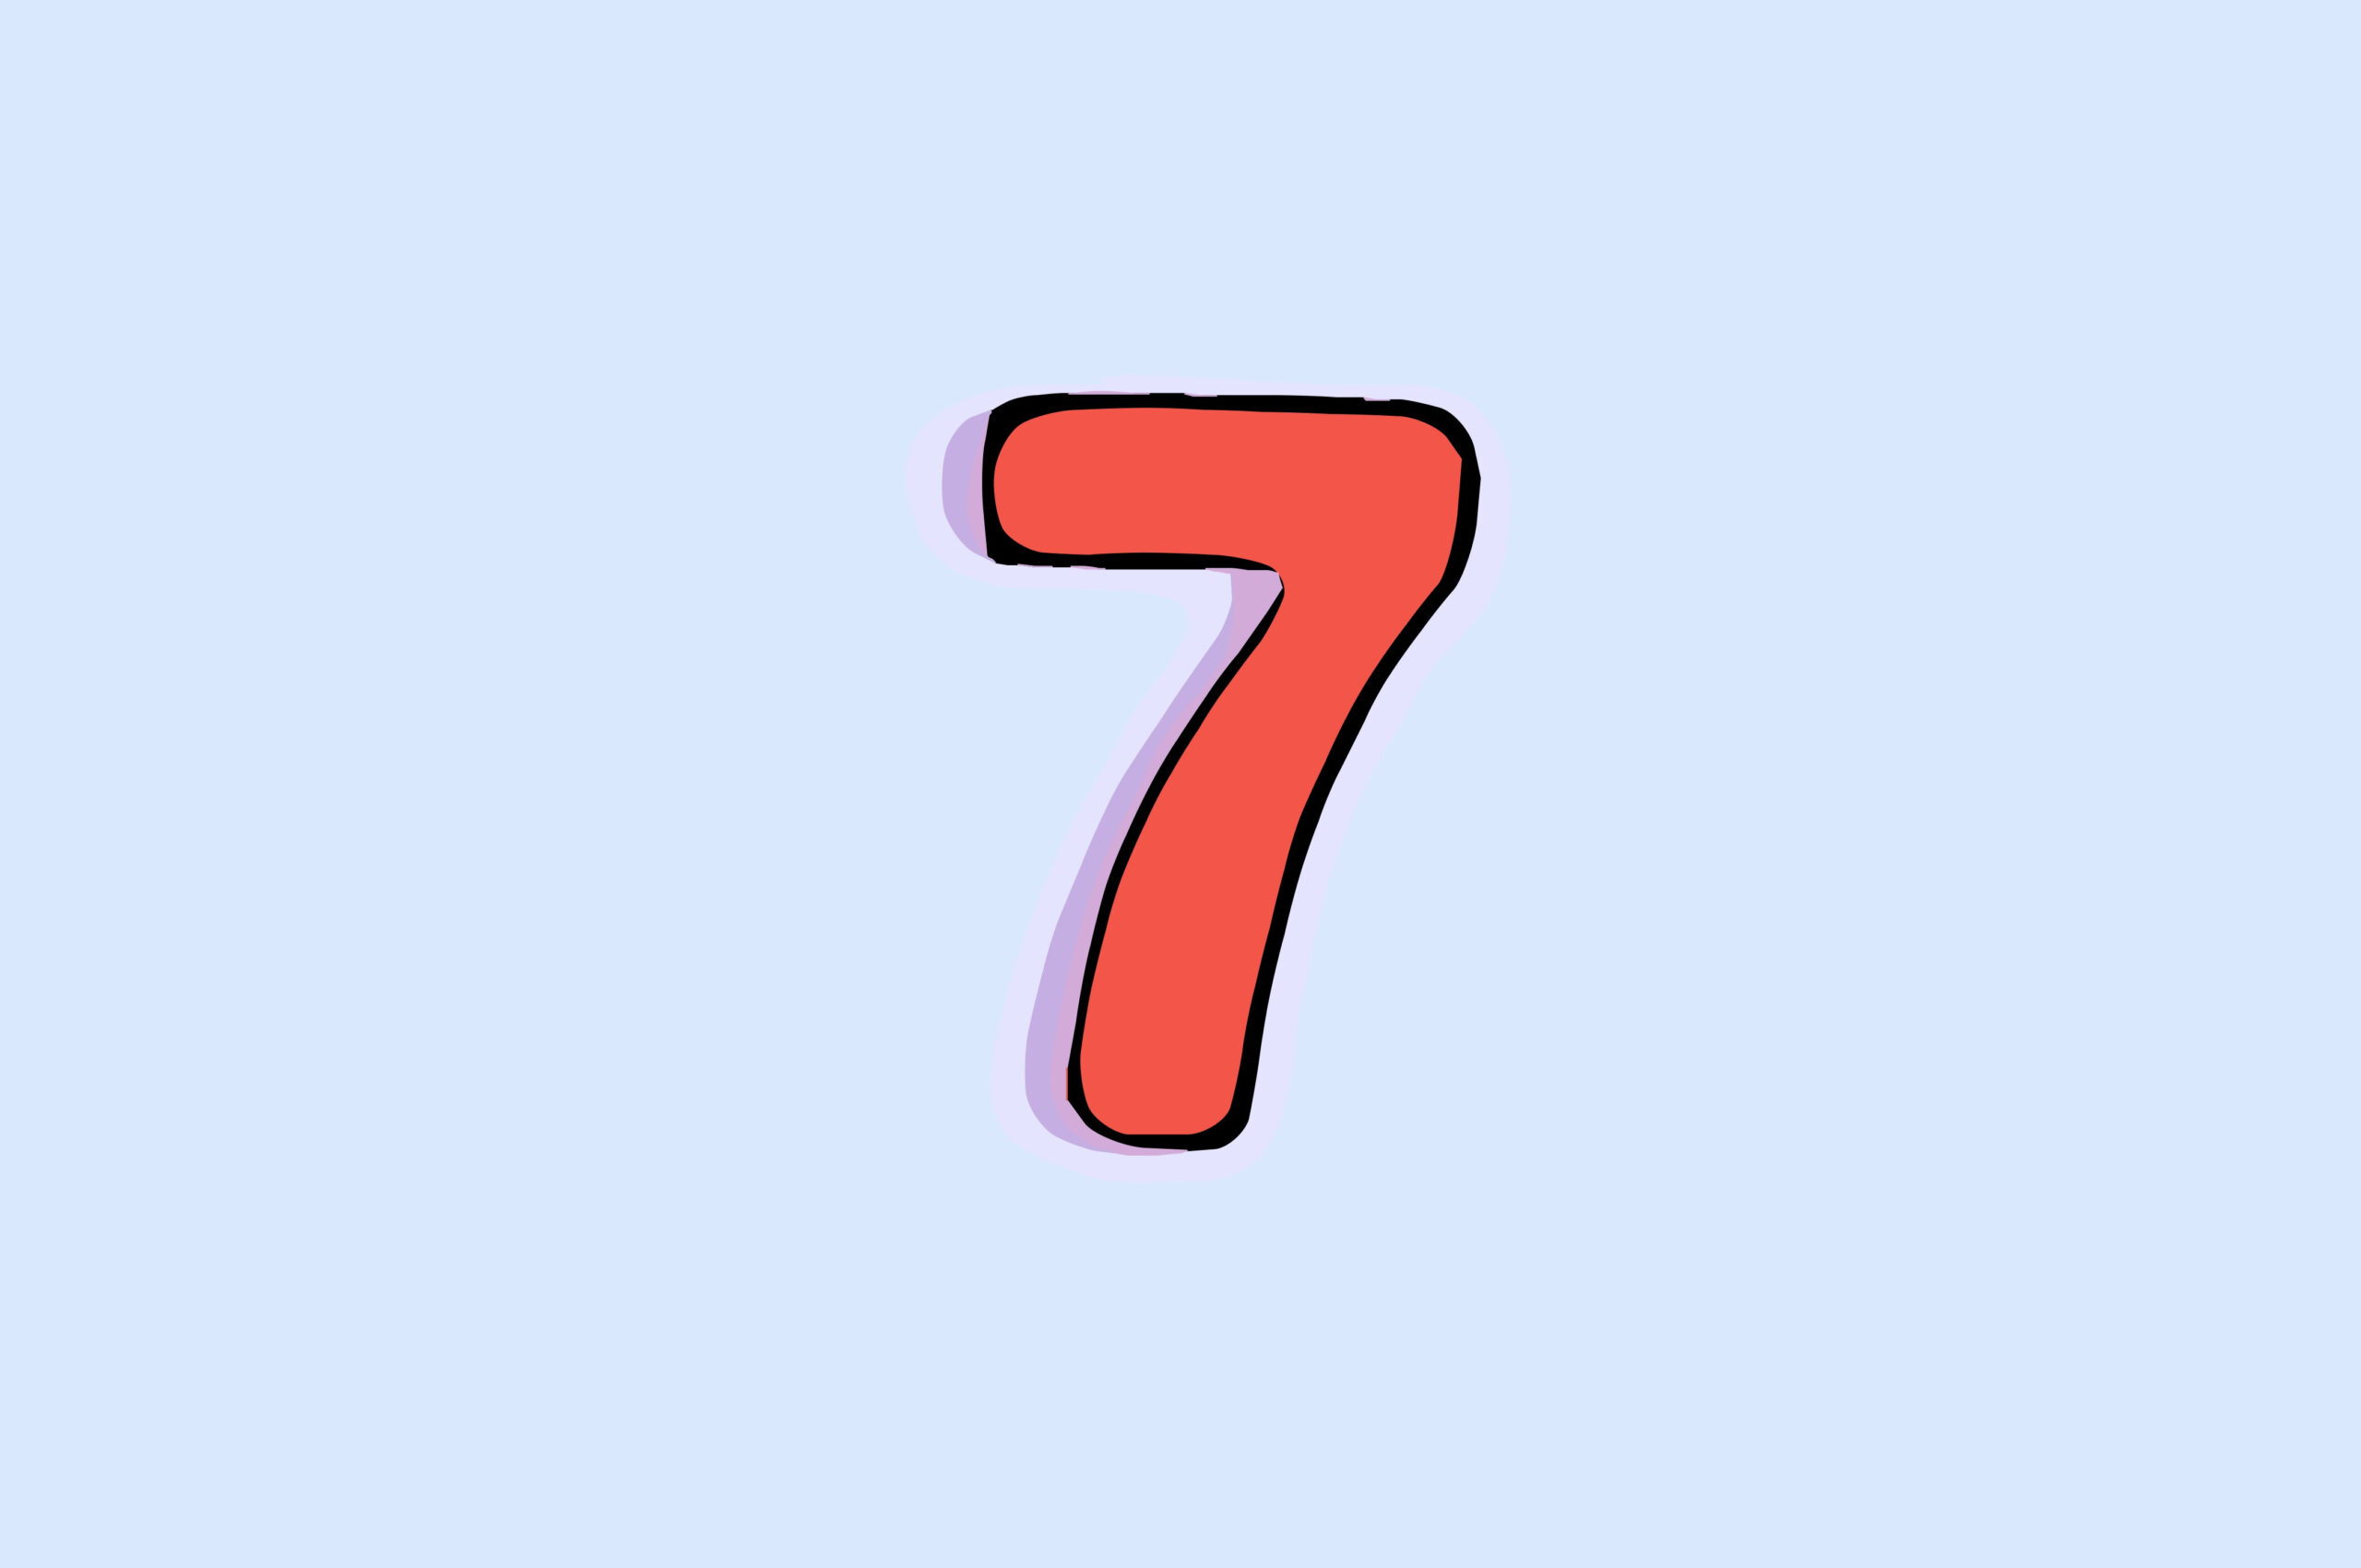 the number "7" in red against a bluish background, representing the 7 dangers of a detox at home